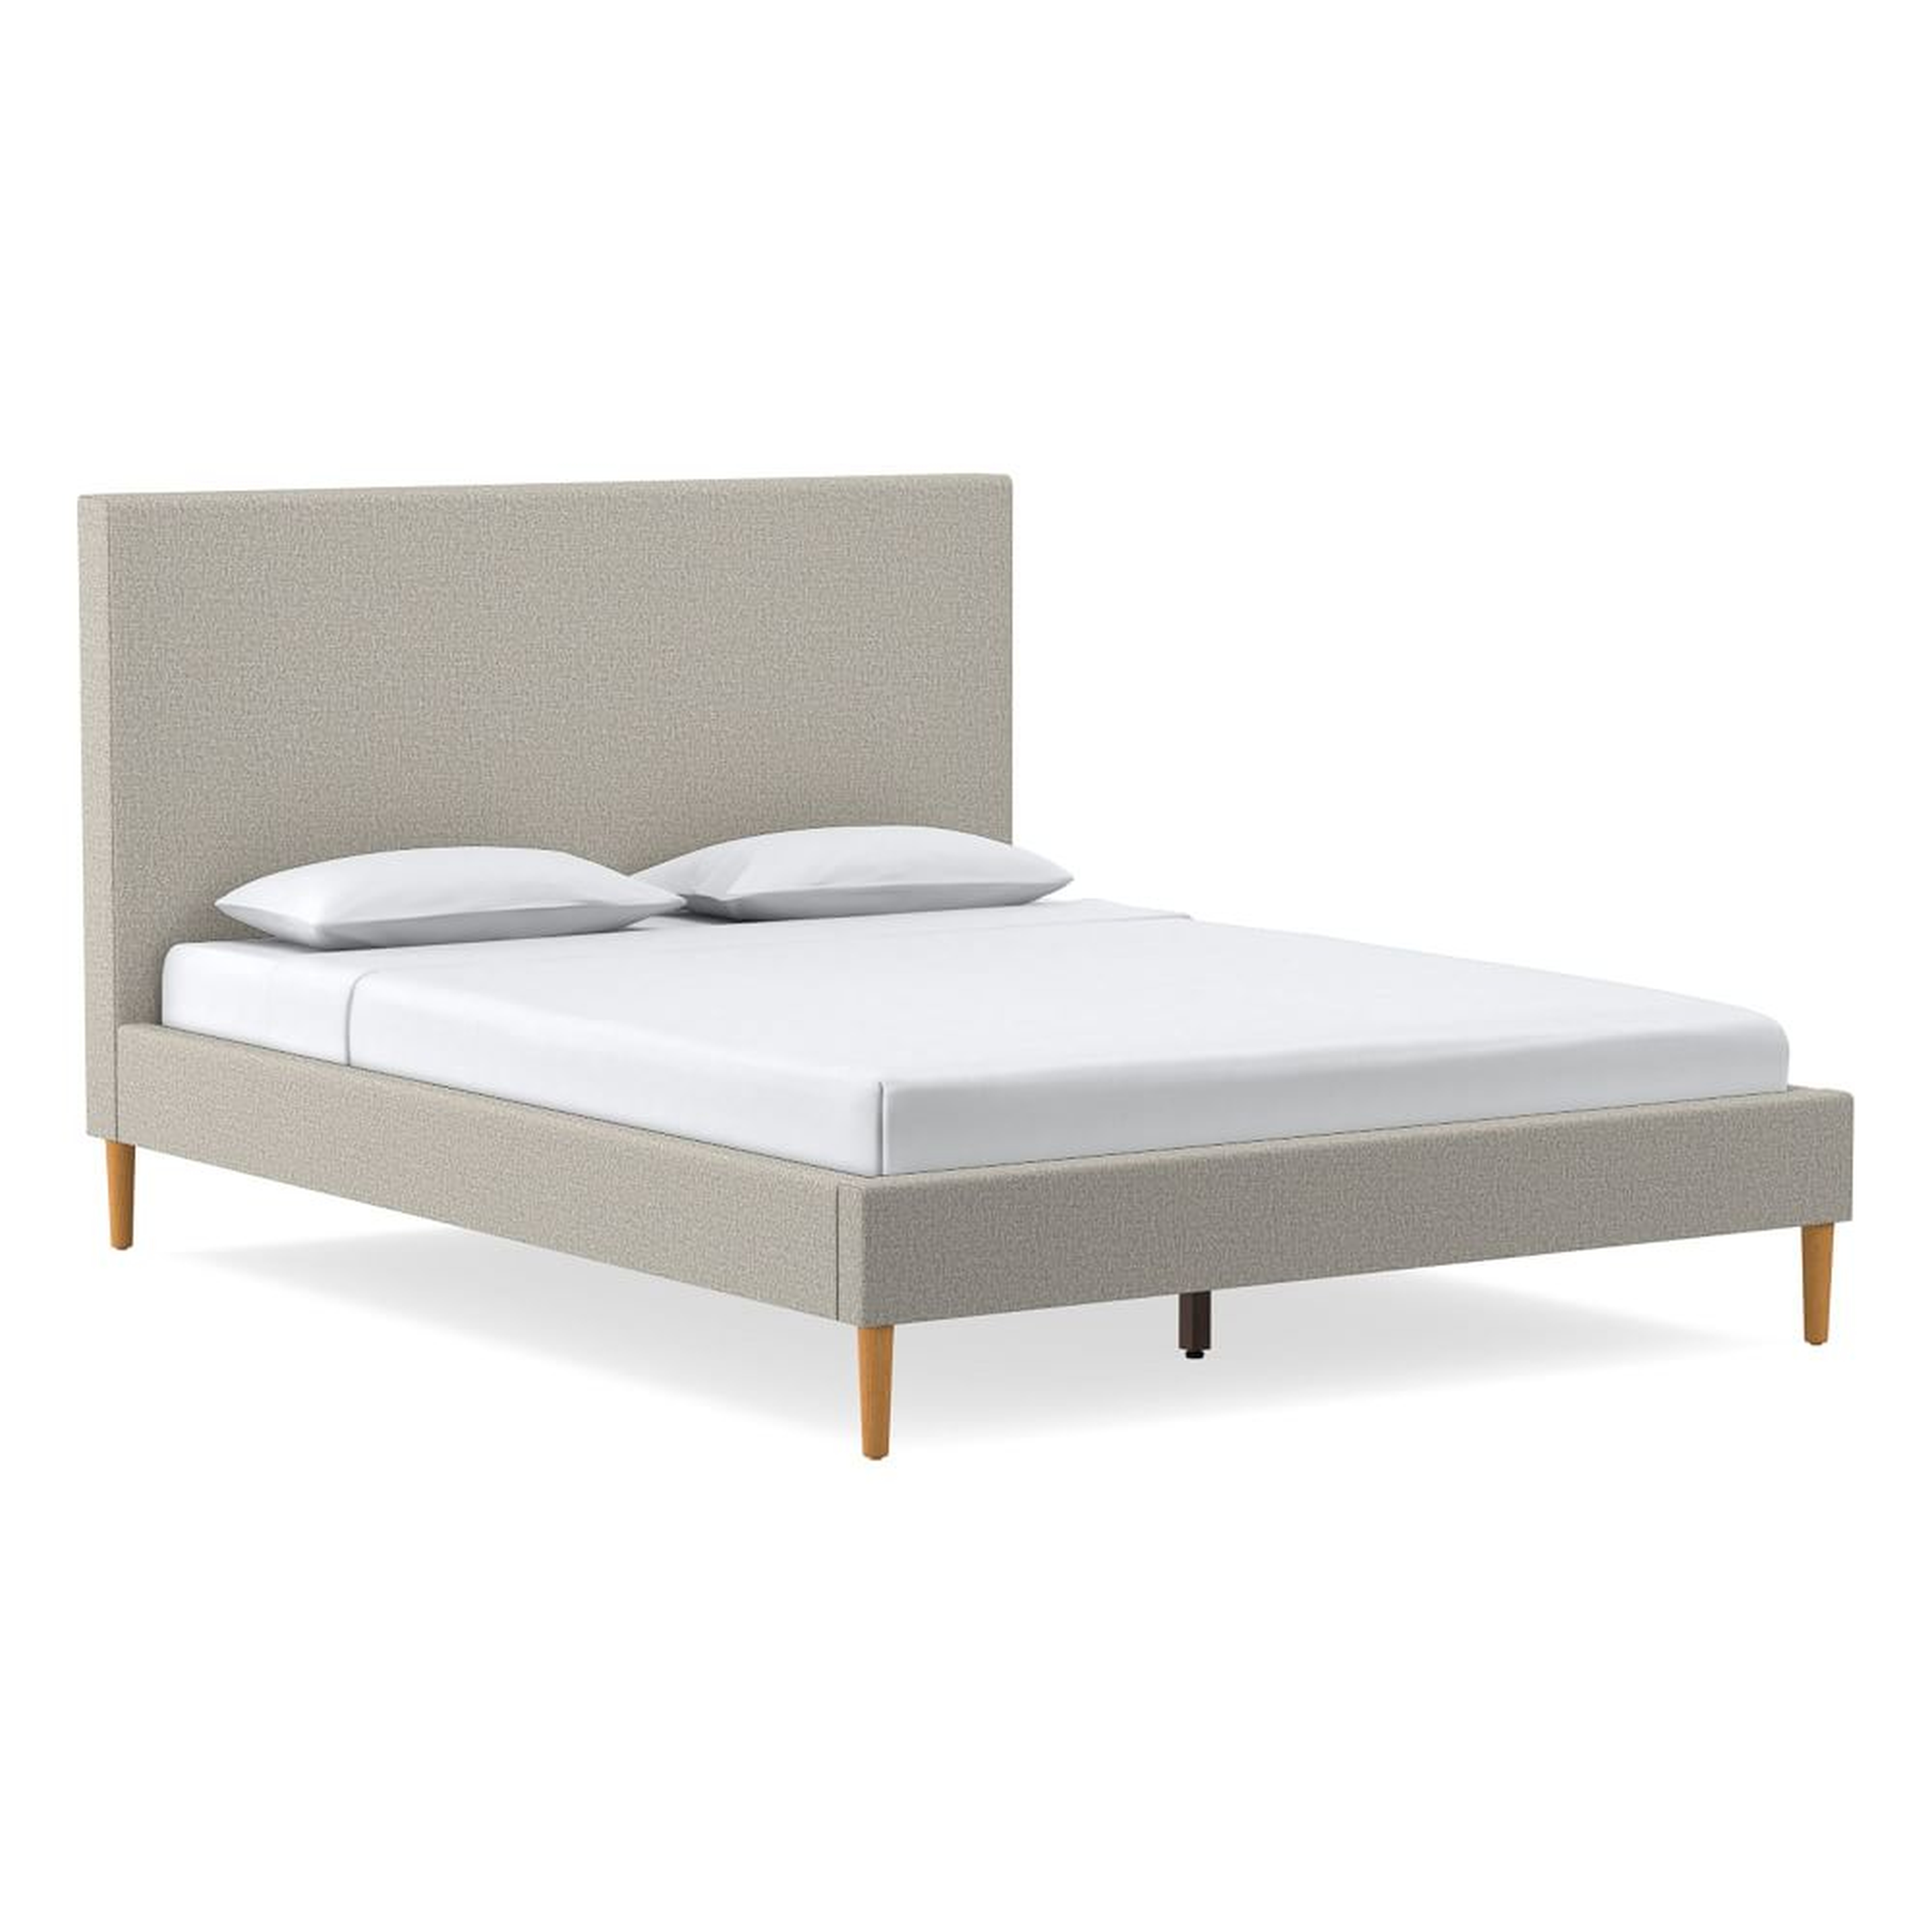 Emmett No Tufting Bed, Queen, Twill, Dove, Almond Wood - West Elm